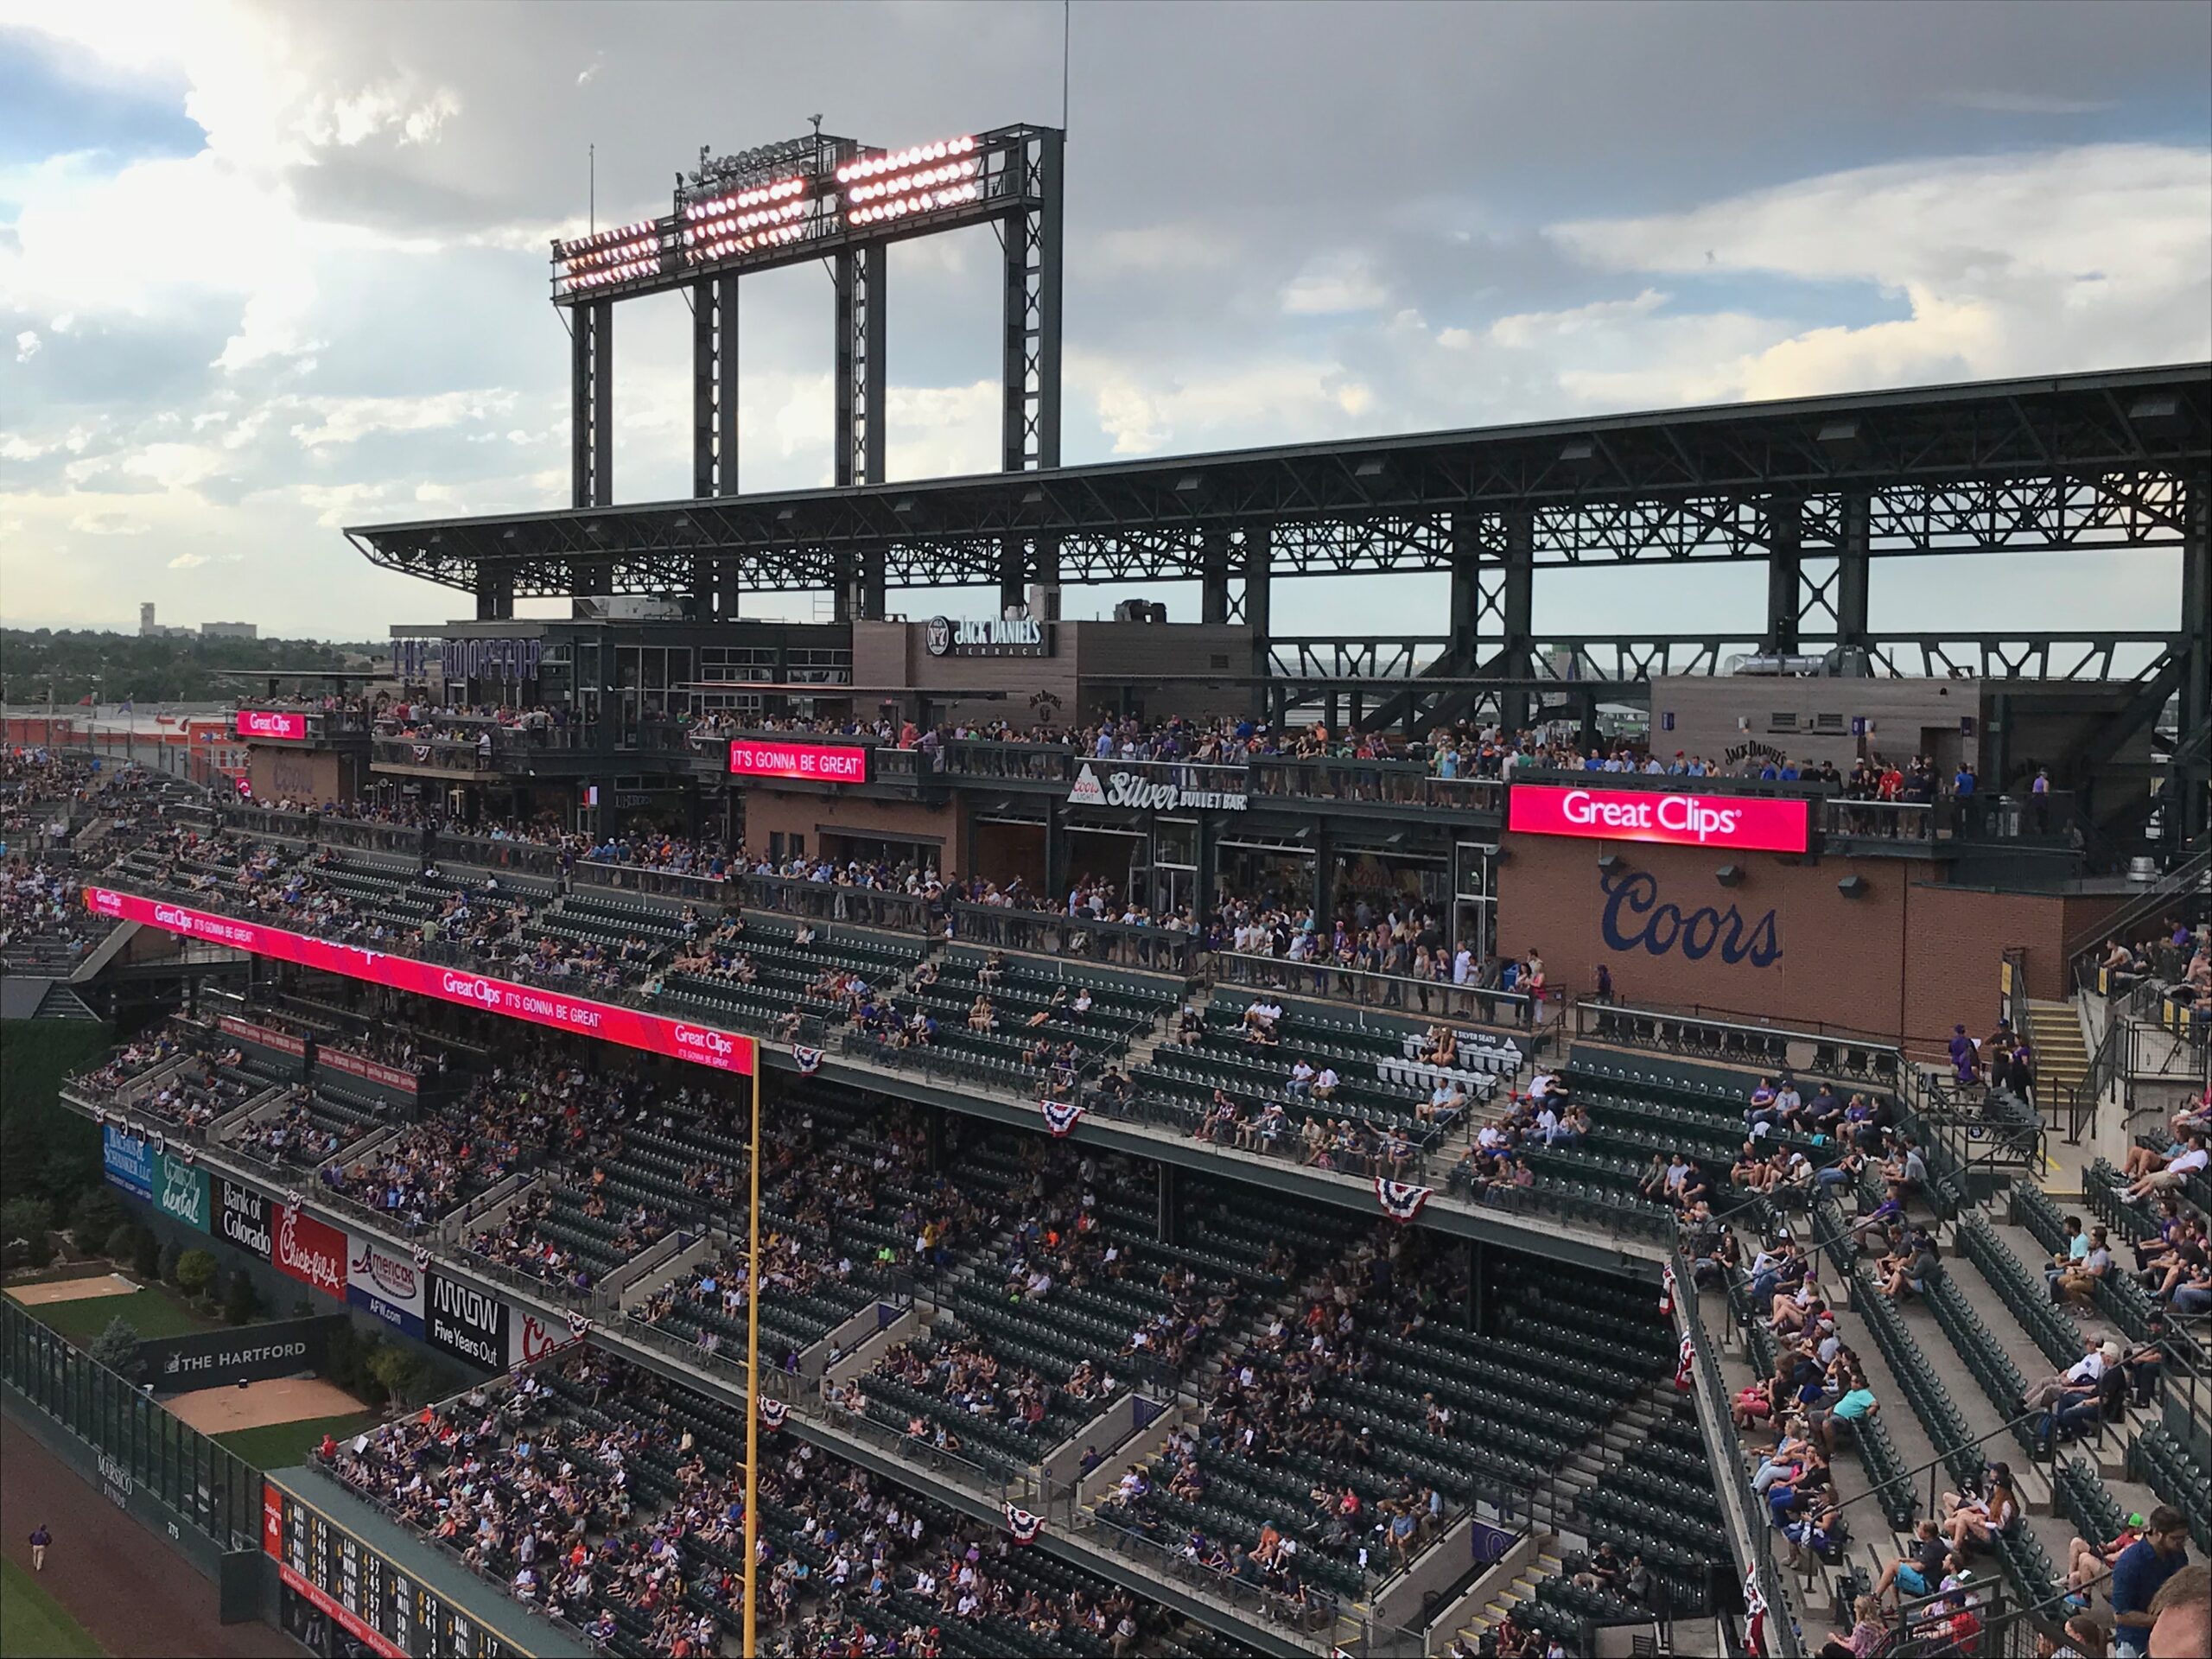 Fan was calling for Dinger, not using racial slur, Rockies say